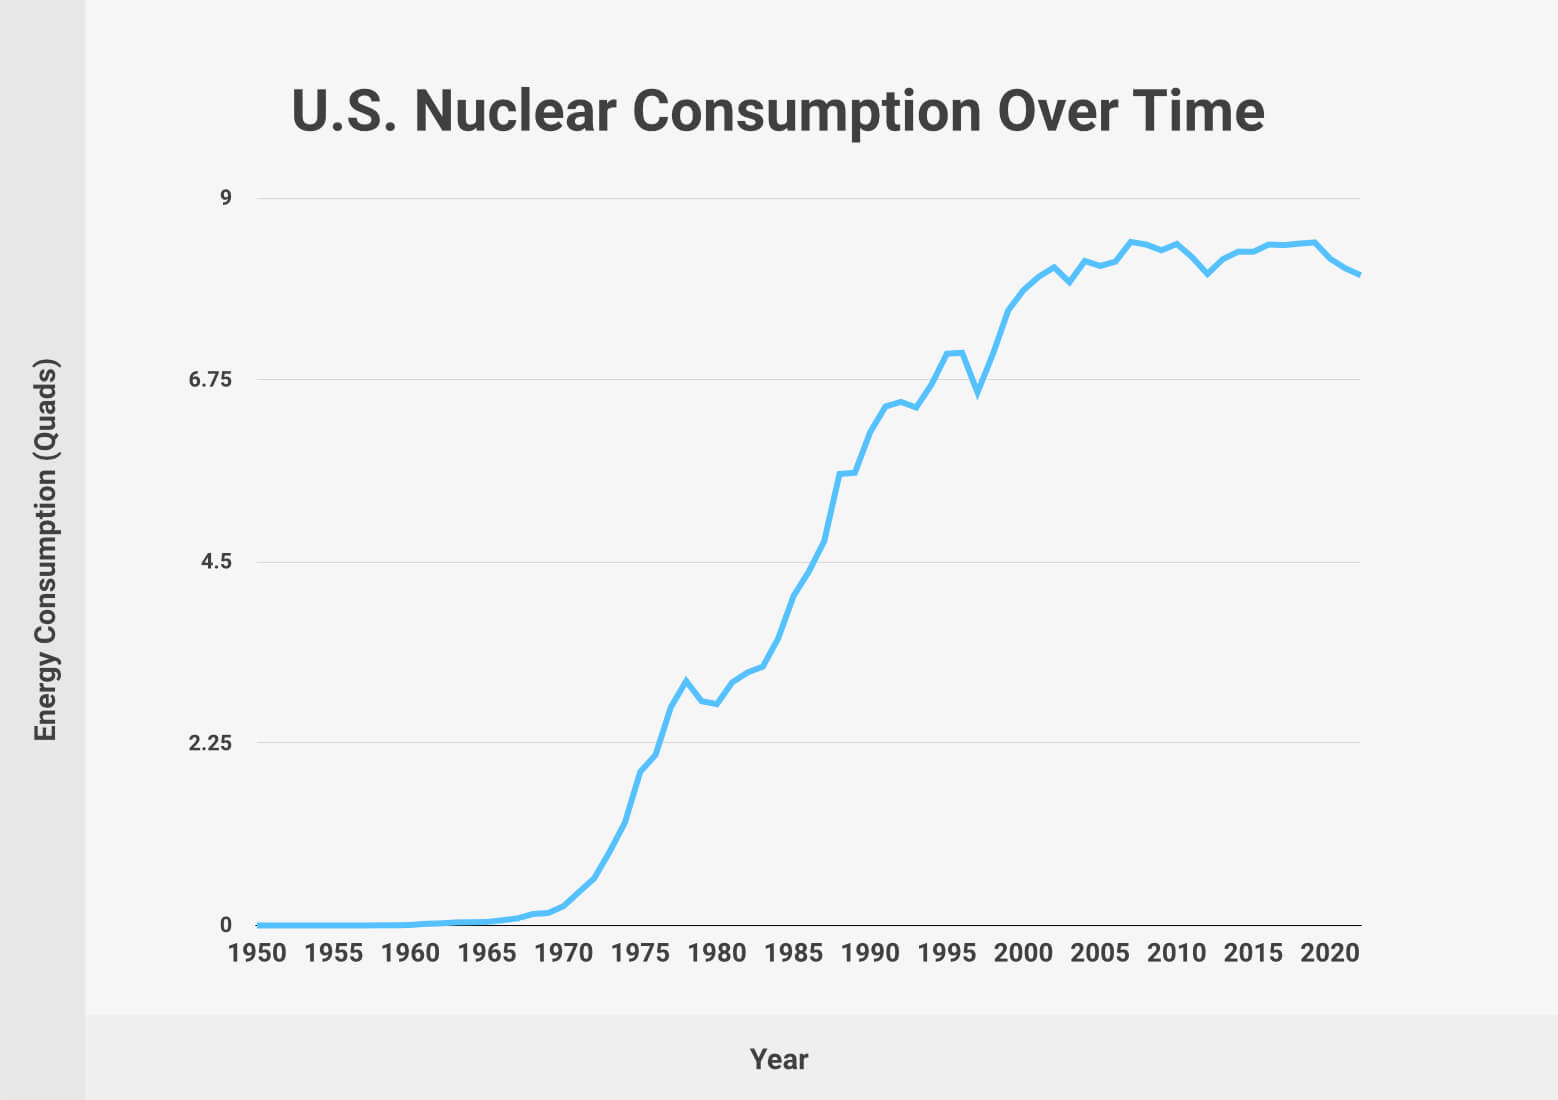 U.S. Nuclear Energy Consumption Over Time